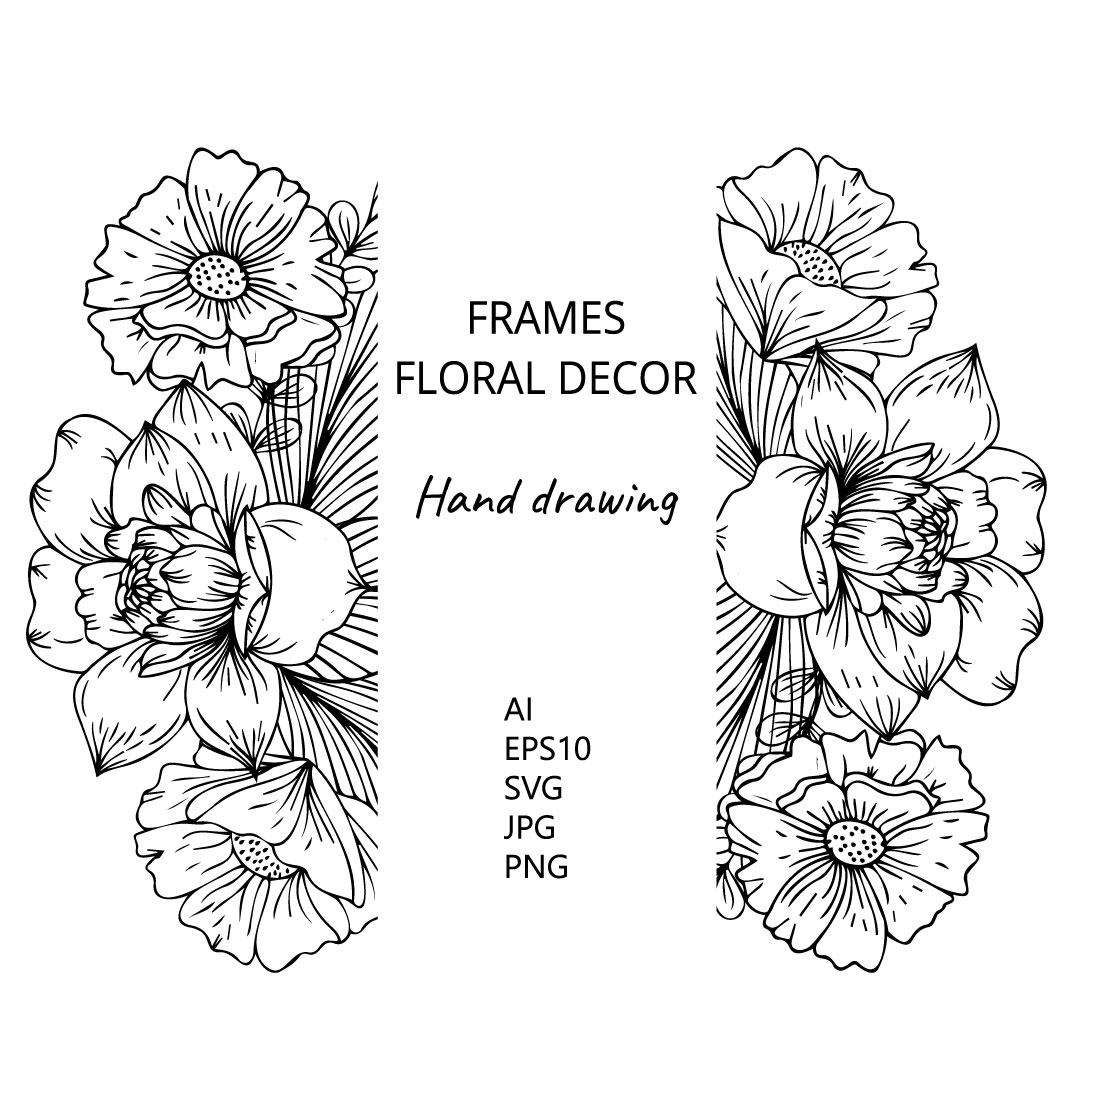 Two Frames with Floral Decor and Elements of Decor cover image.